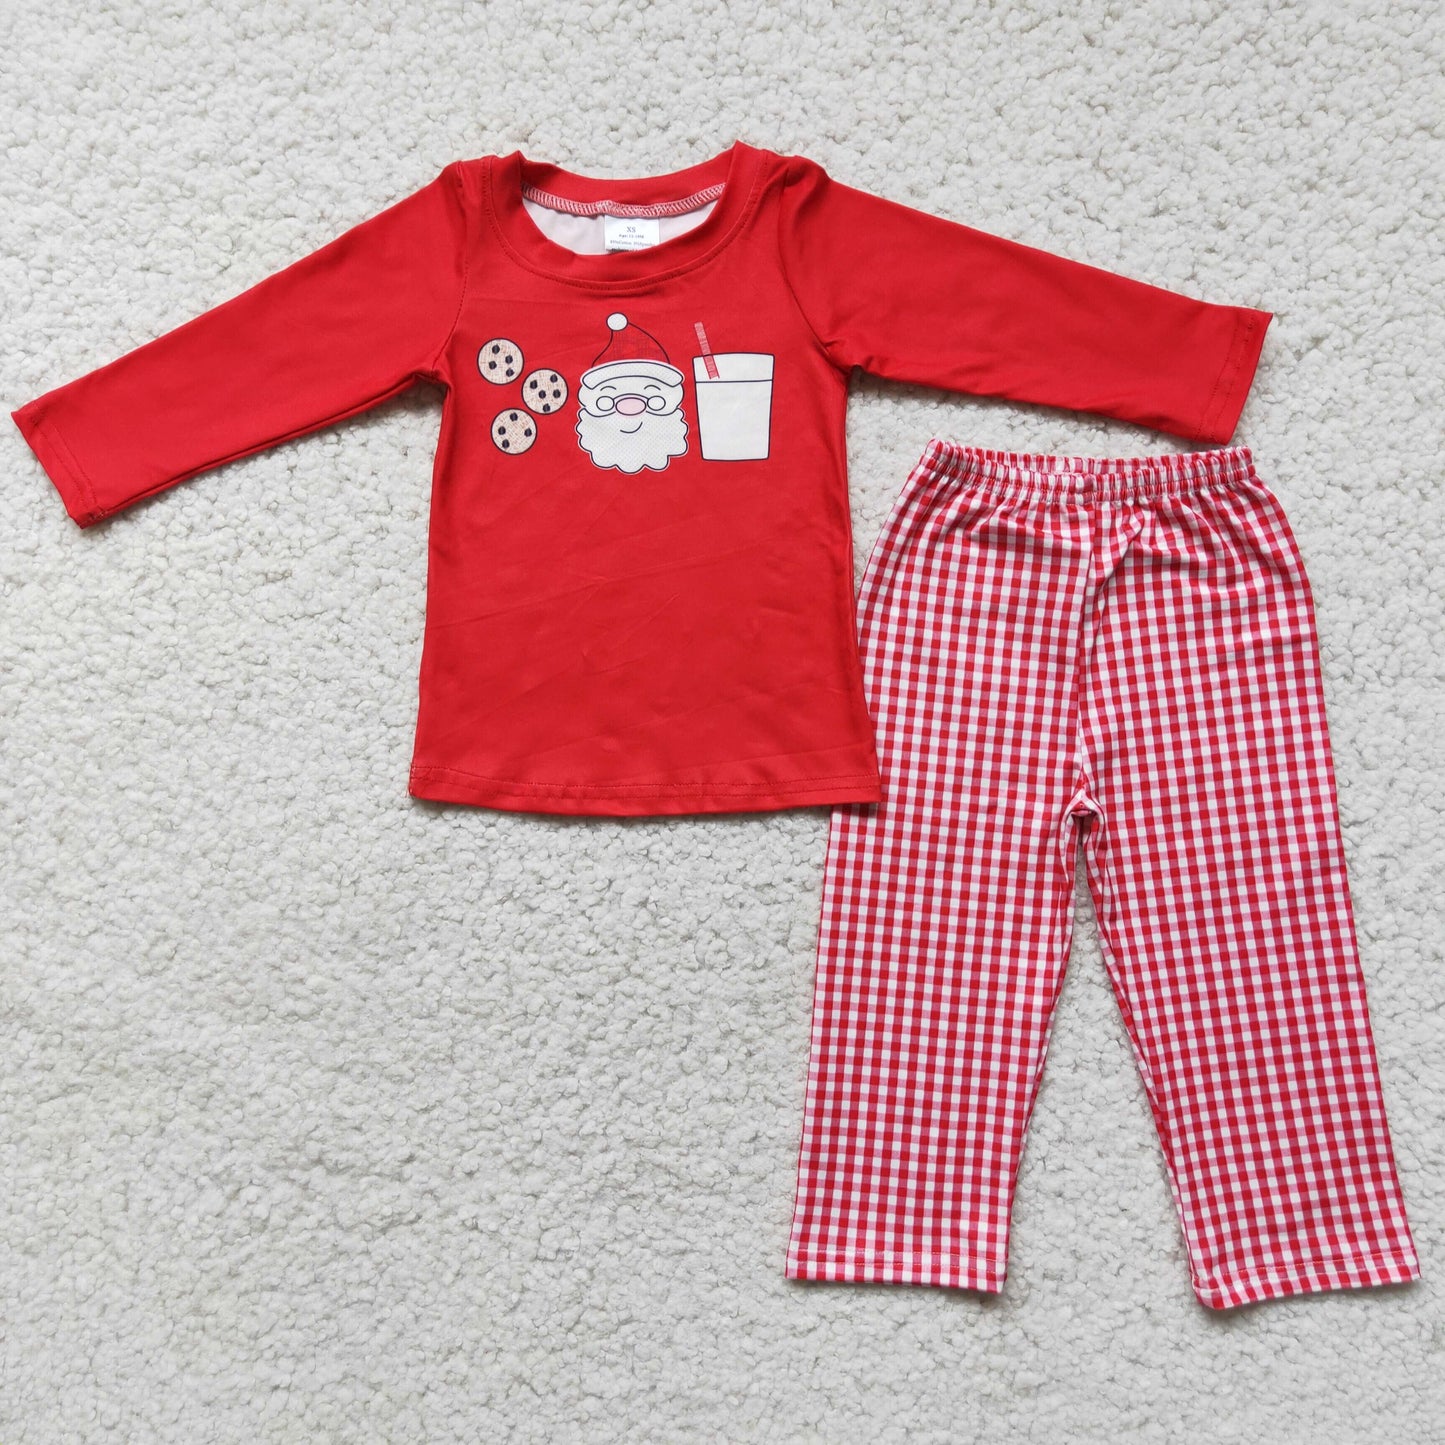 Boy's Christmas Outfit Red Plaid Pants Set